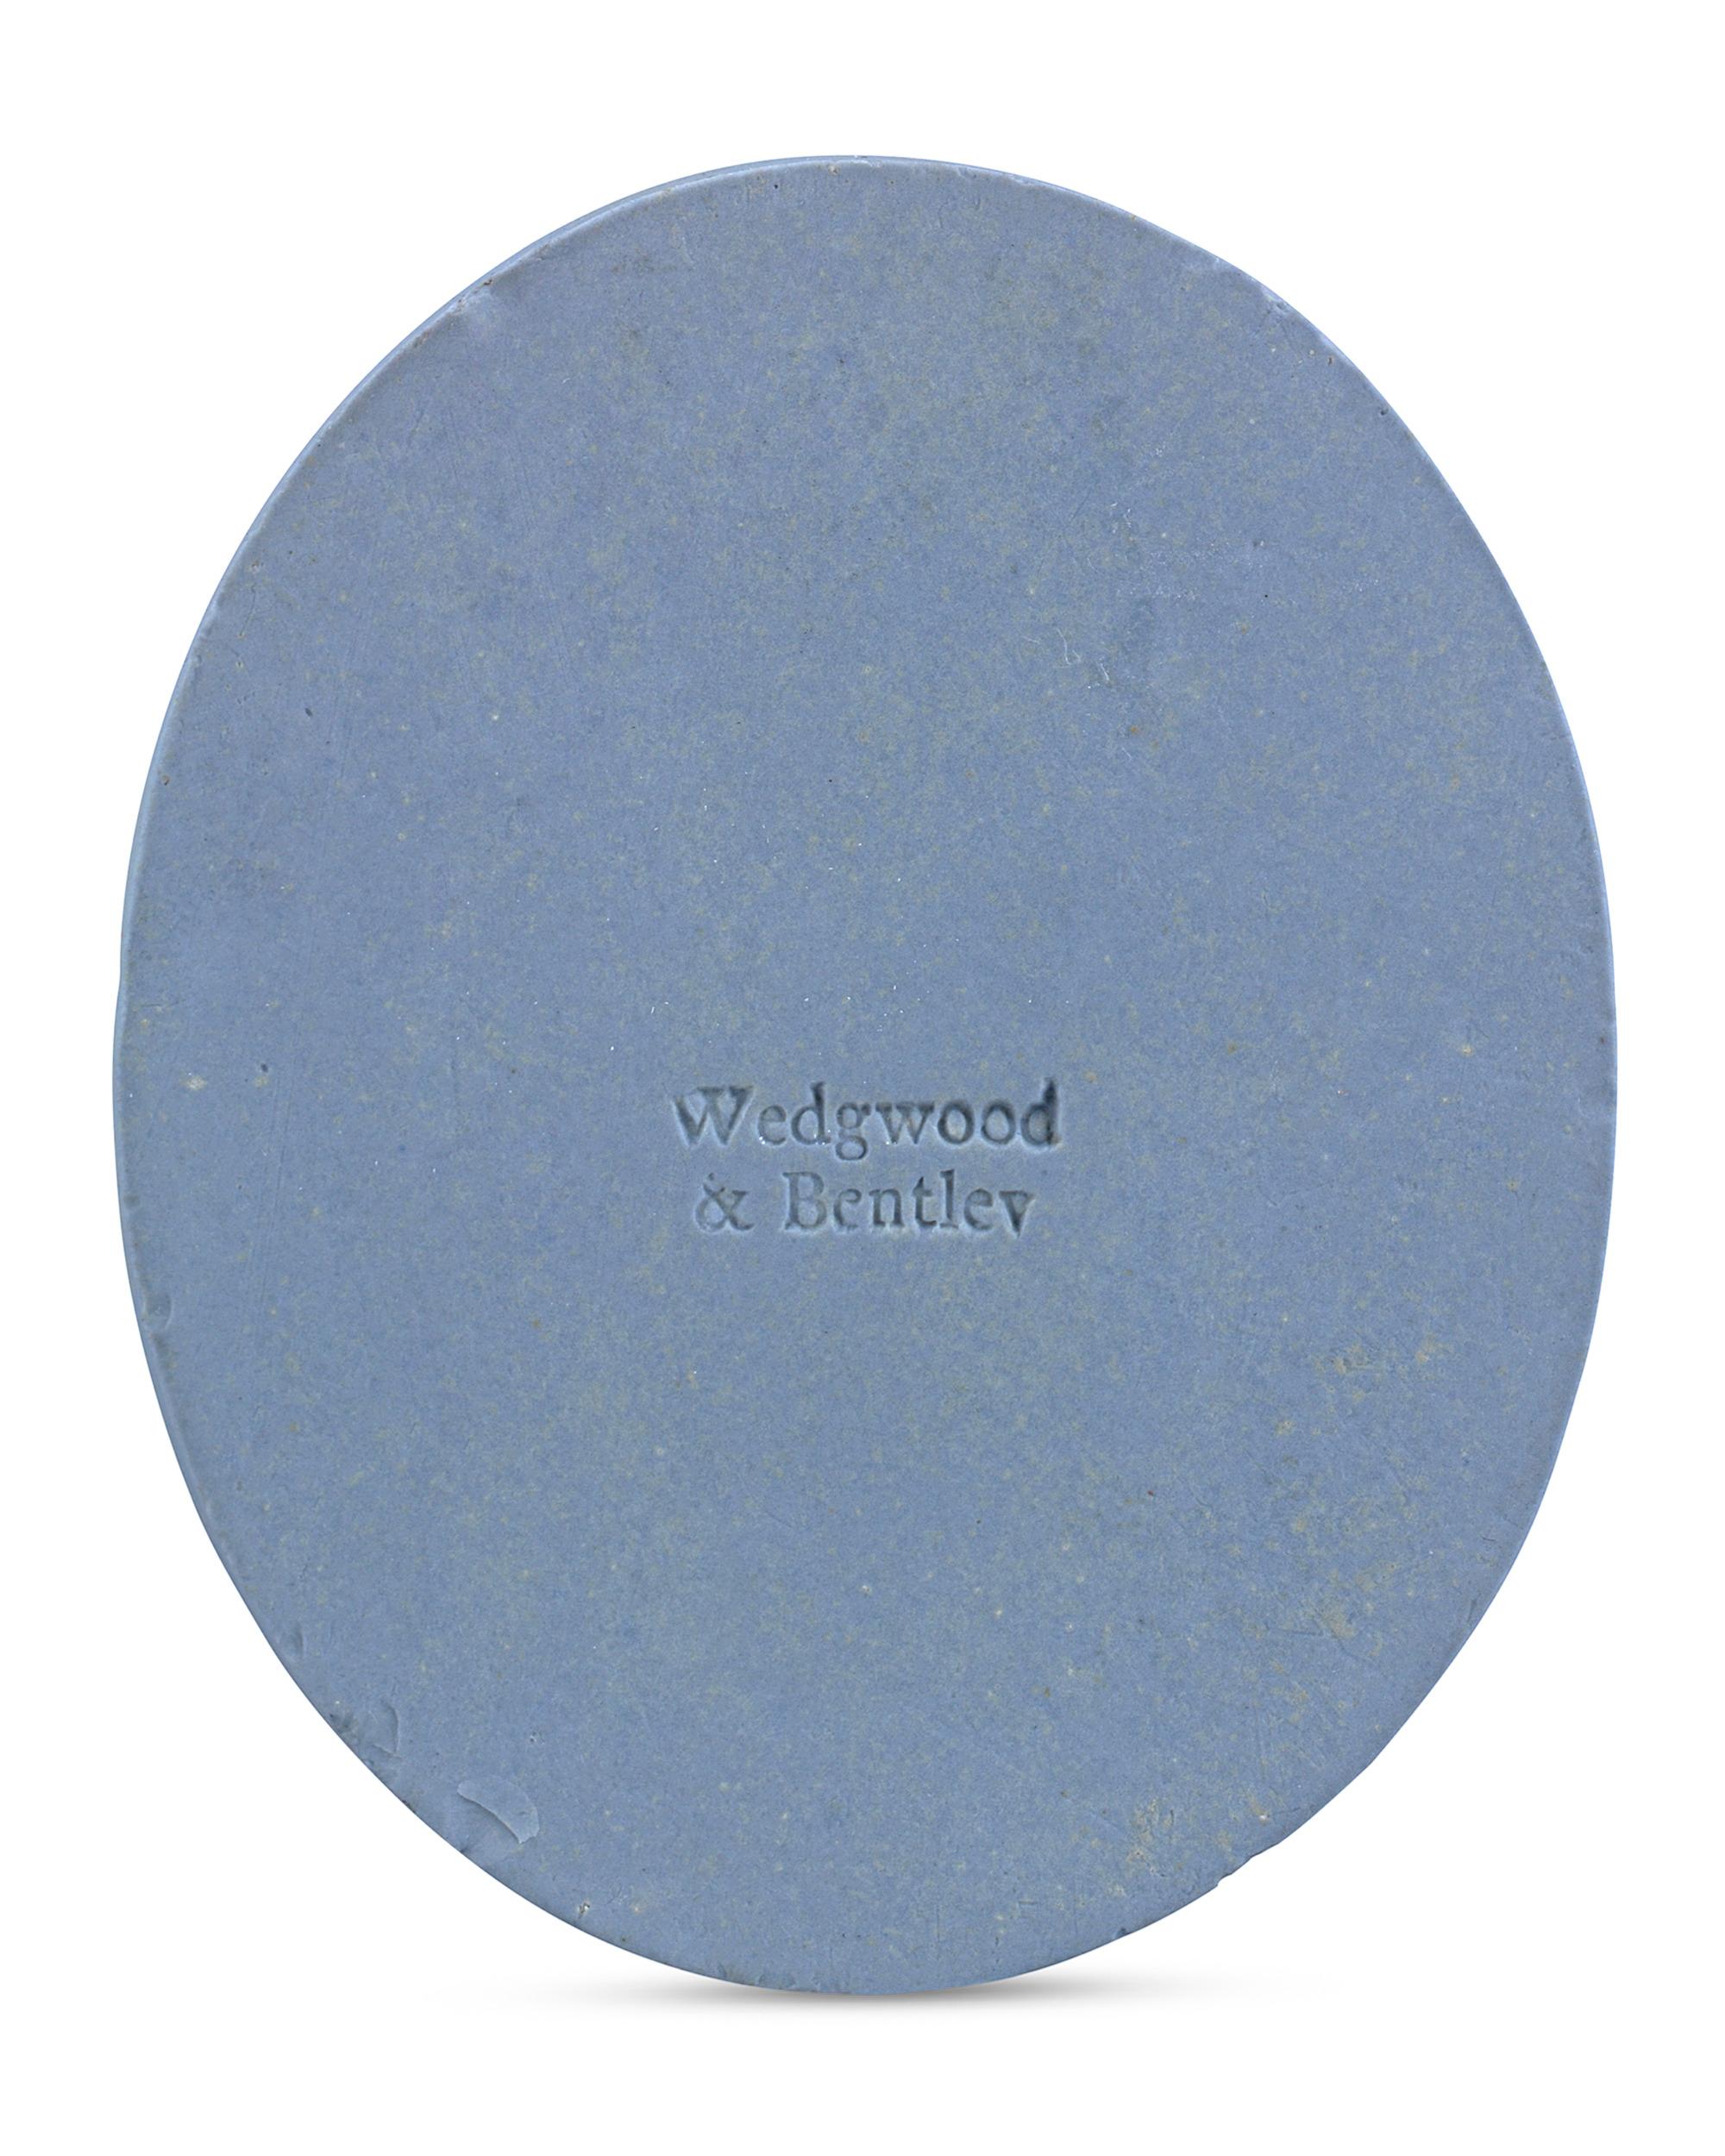 This exceptional blue and white jasperware plaque by Wedgwood & Bentley depicts Genevan writer, philosopher and composer Jean-Jacques Rousseau. Some of Wedgwood's most meticulous work was executed in cameos and medallions, often featuring royalty